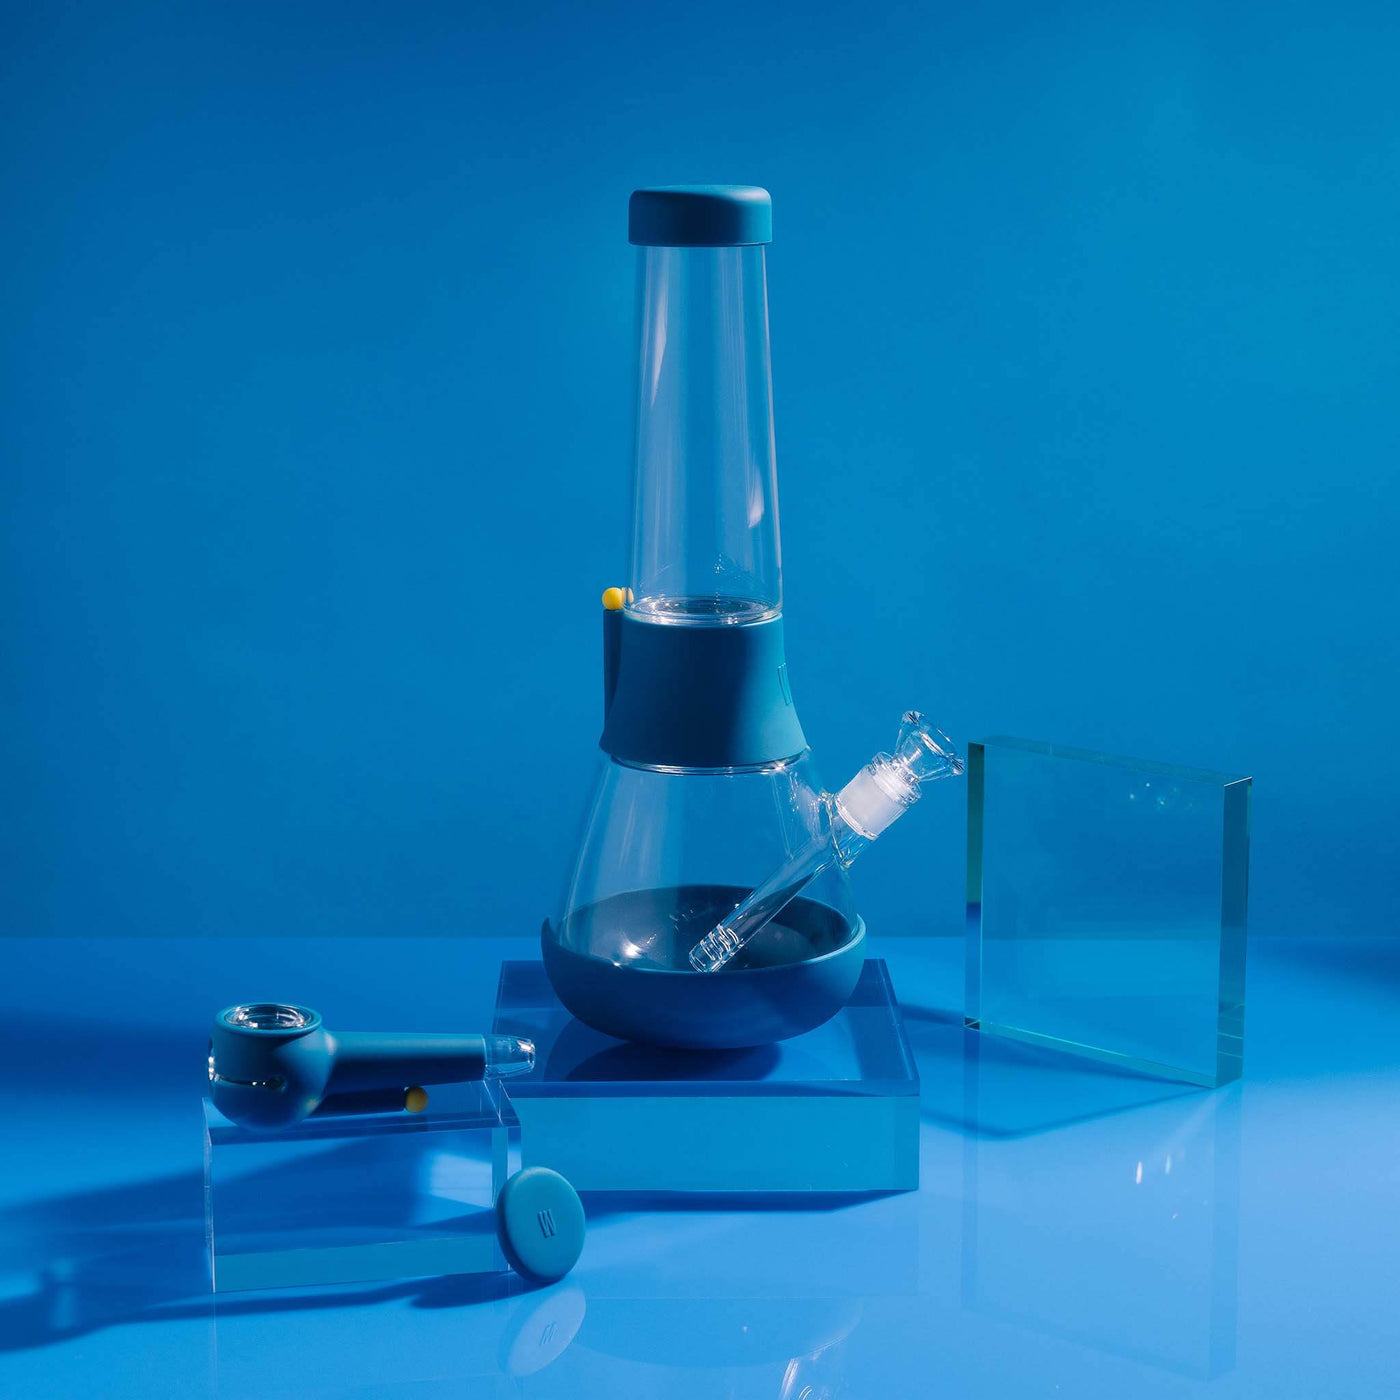  A bundle set of the Weeday beaker bong and silicone pipe with glass bowl, sitting on acrylic blocks, showcased in a midnight blue studio setting.